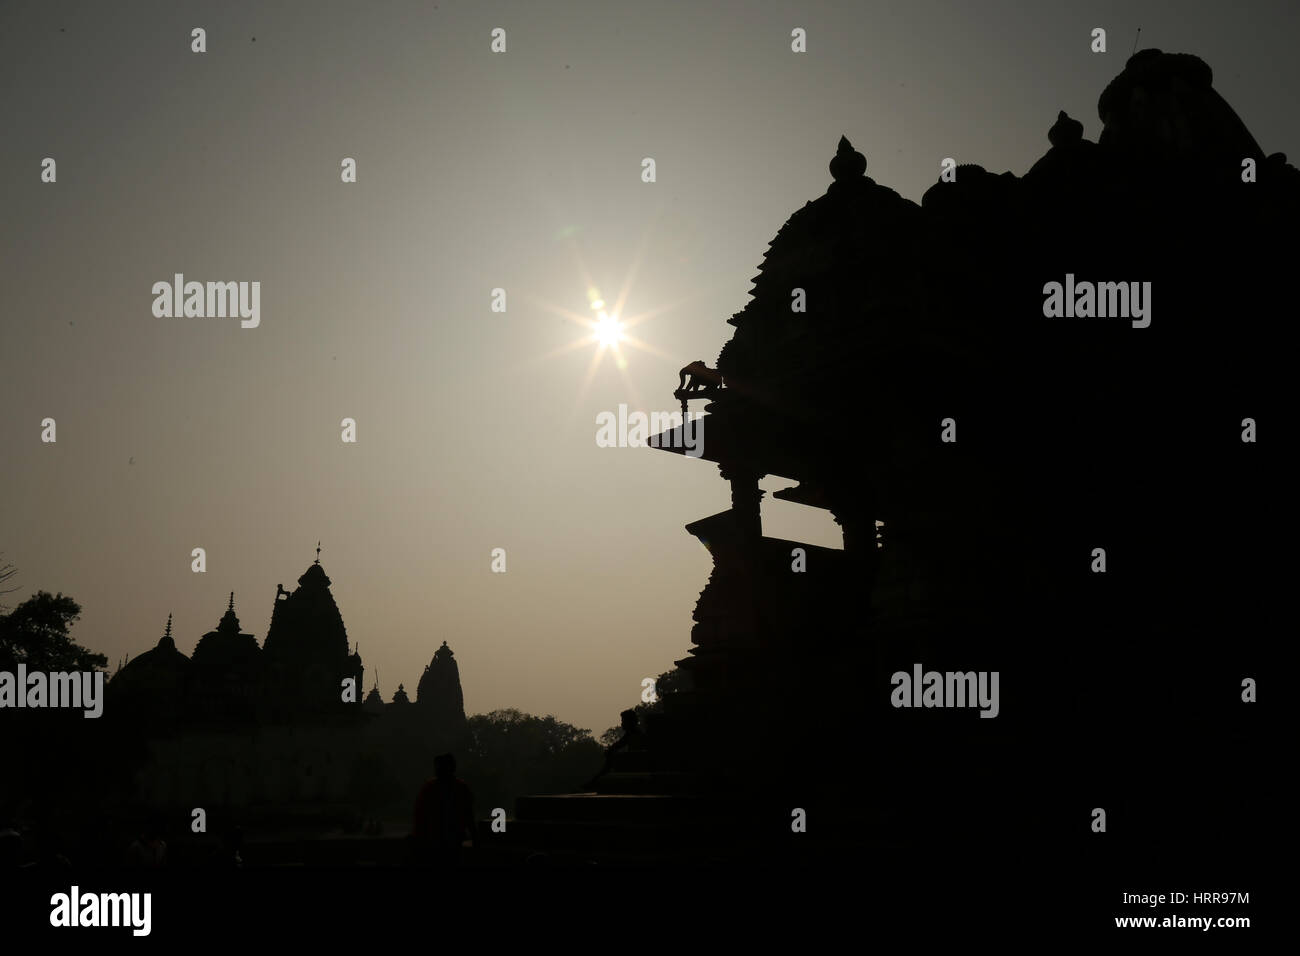 Silhouette of the famous Hindu temple in the Western Group of Chandela Temples at Khajuraho, Madhya Pradesh, India Stock Photo